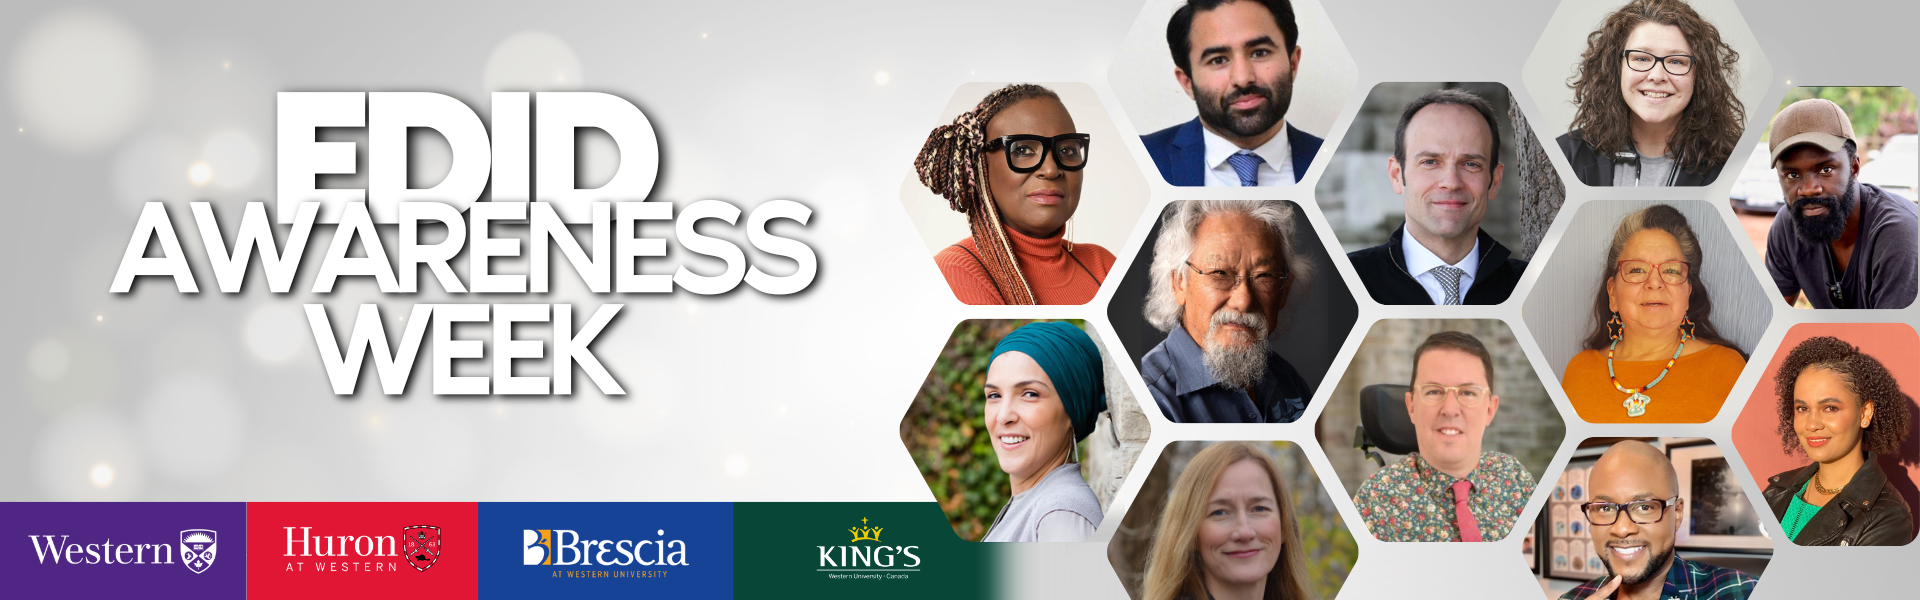 A web banner stating EDID Awareness Week on the left with a mosaic of the speakers on the left side. The bottom has the logos of Western, Huron, Brescia and King's